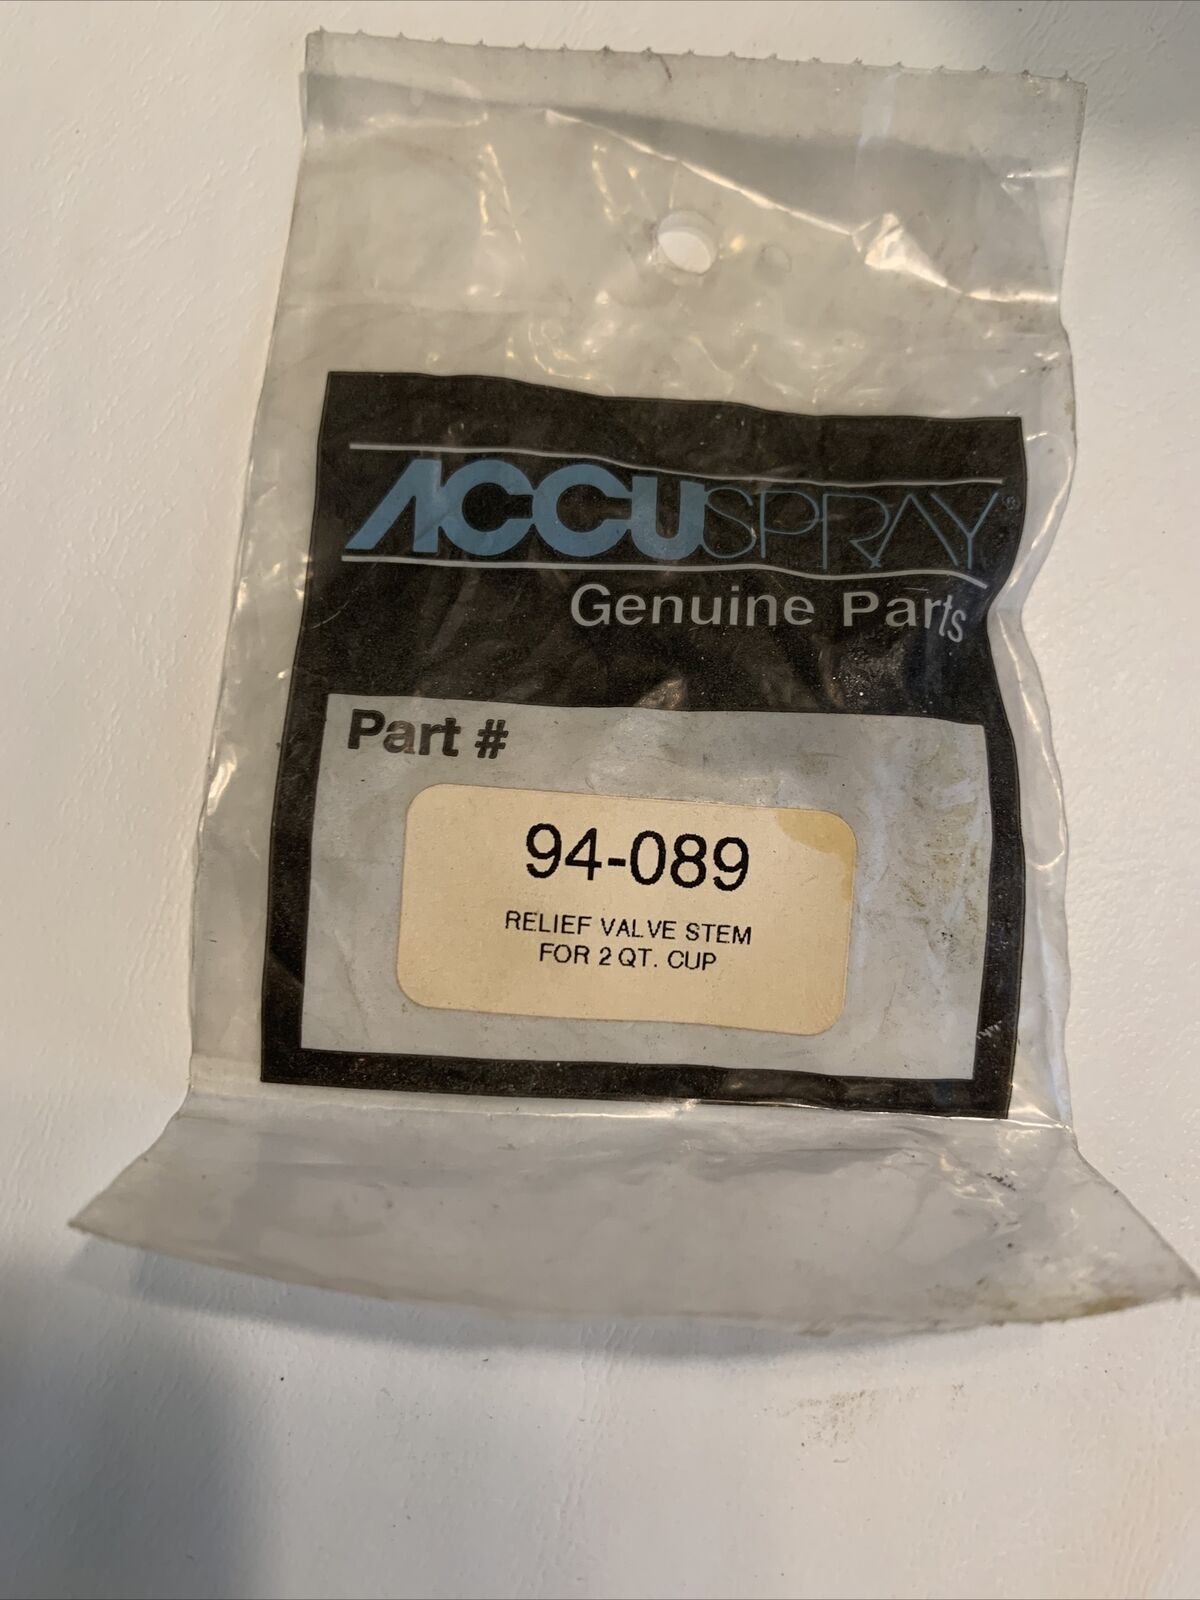 Accuspray Part 94-089 Genuine Replacement Part Relief Valve Stem For 2qt Cup